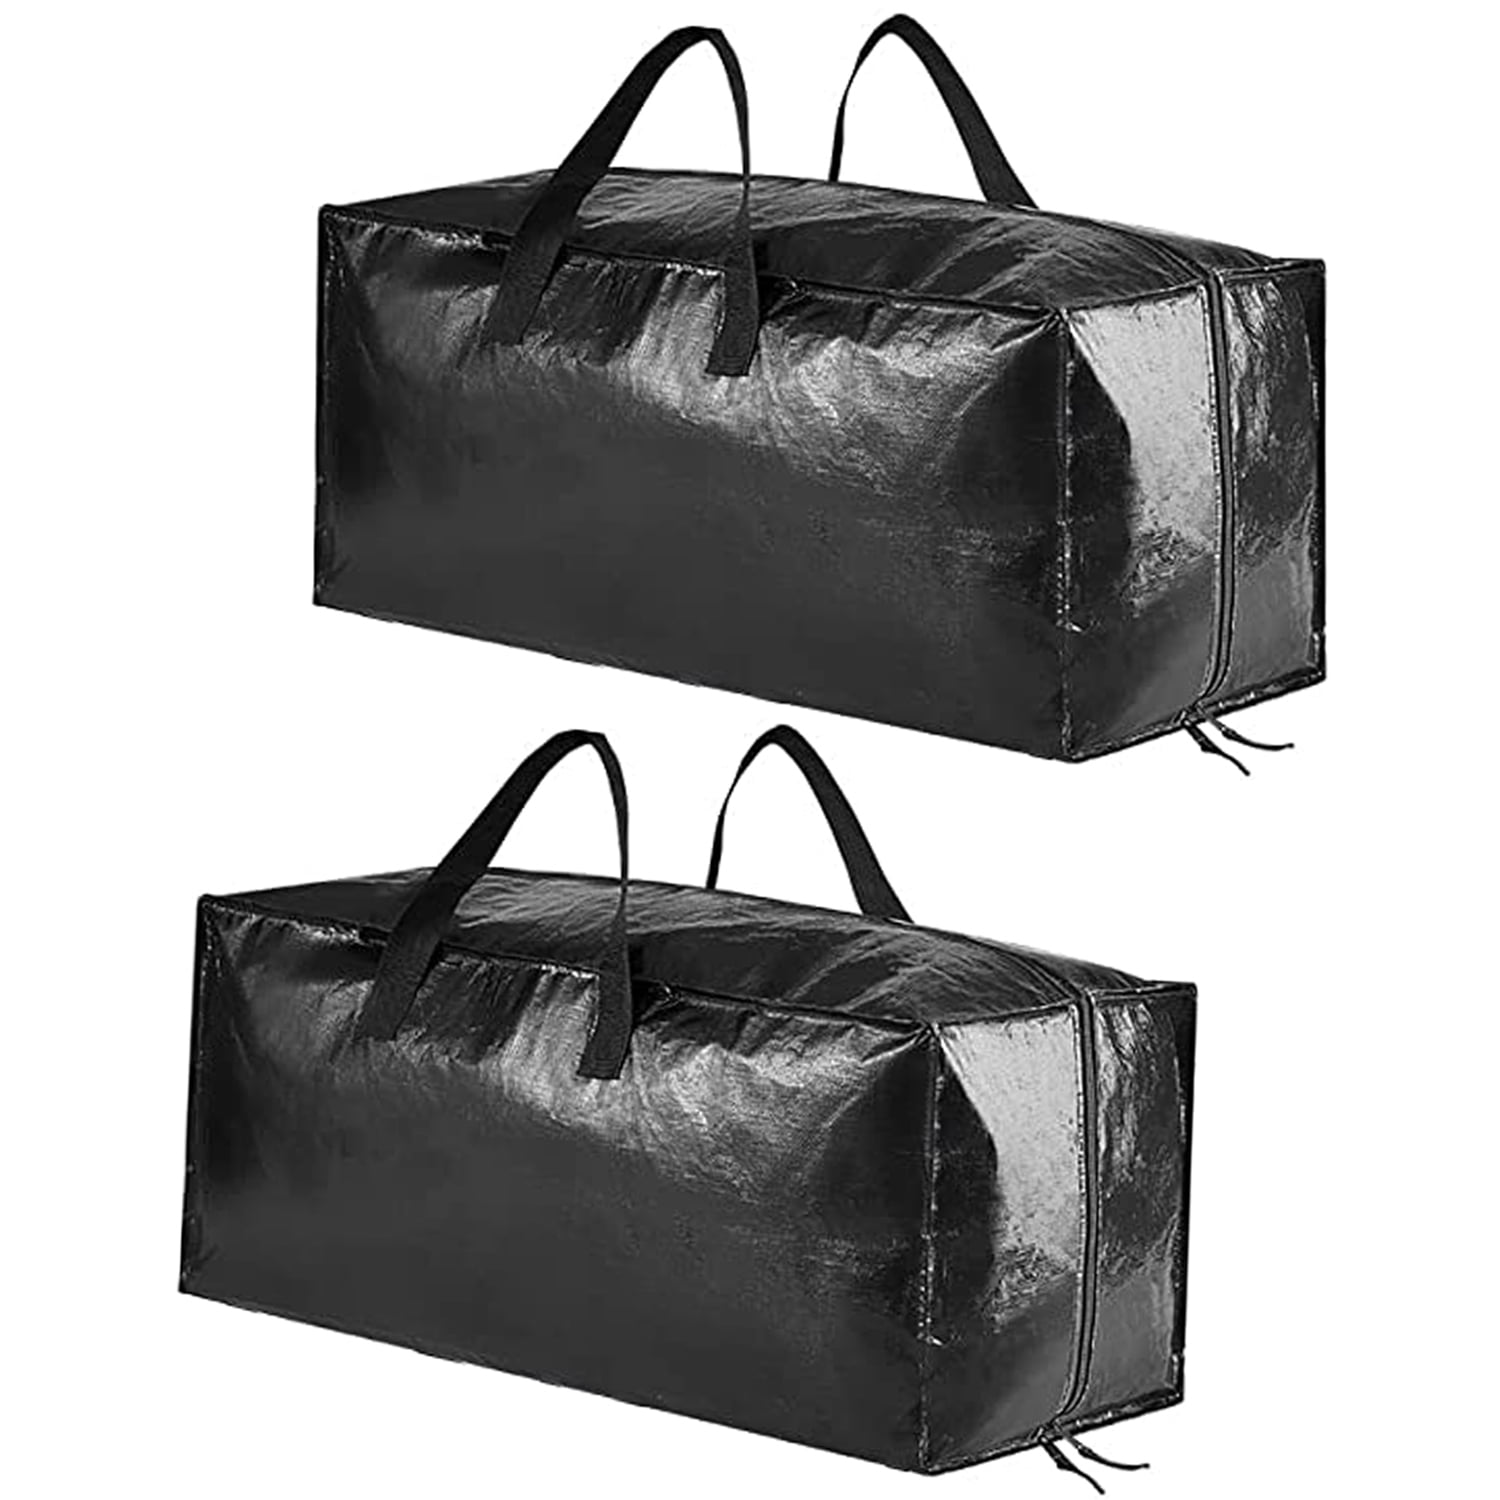 Nefoso Storage Moving Bags, 8Pcs Large Storage Bags for Clothes